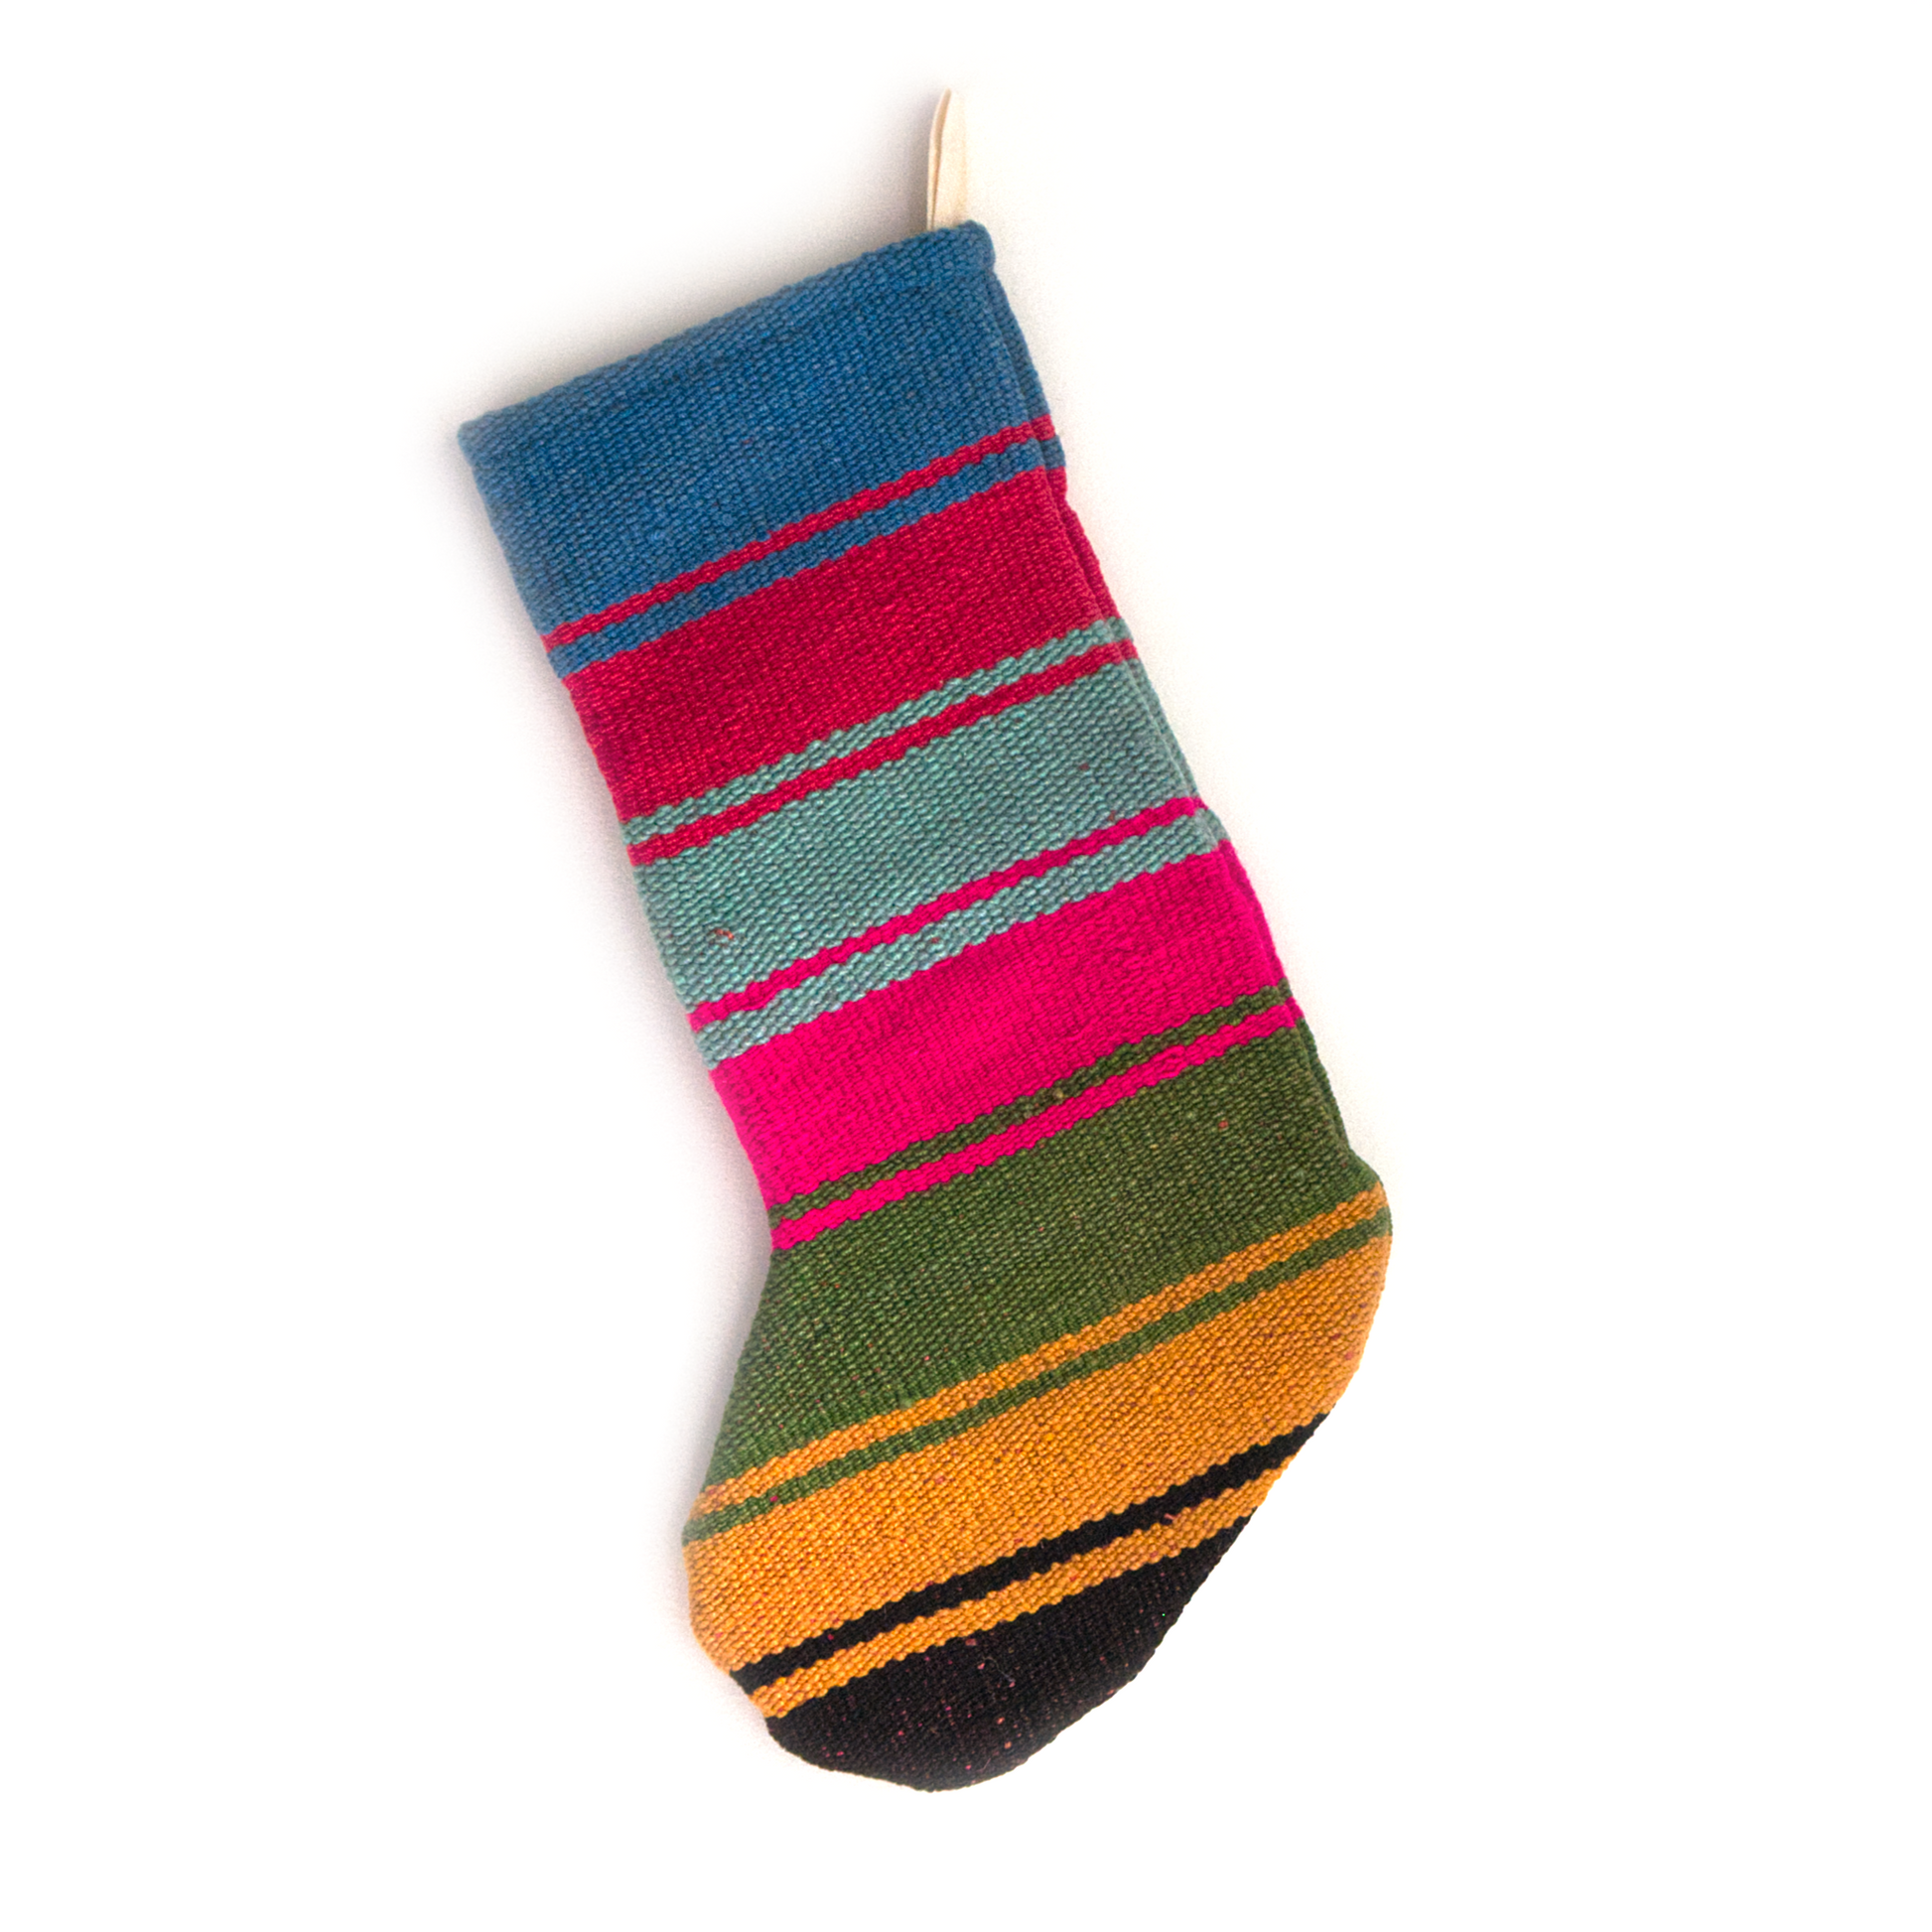 Intiearth_Peruvian_Frazada_Christmas_Stocking_no_8_multicolor_bright_and_colorful_one_of_a_kind.png